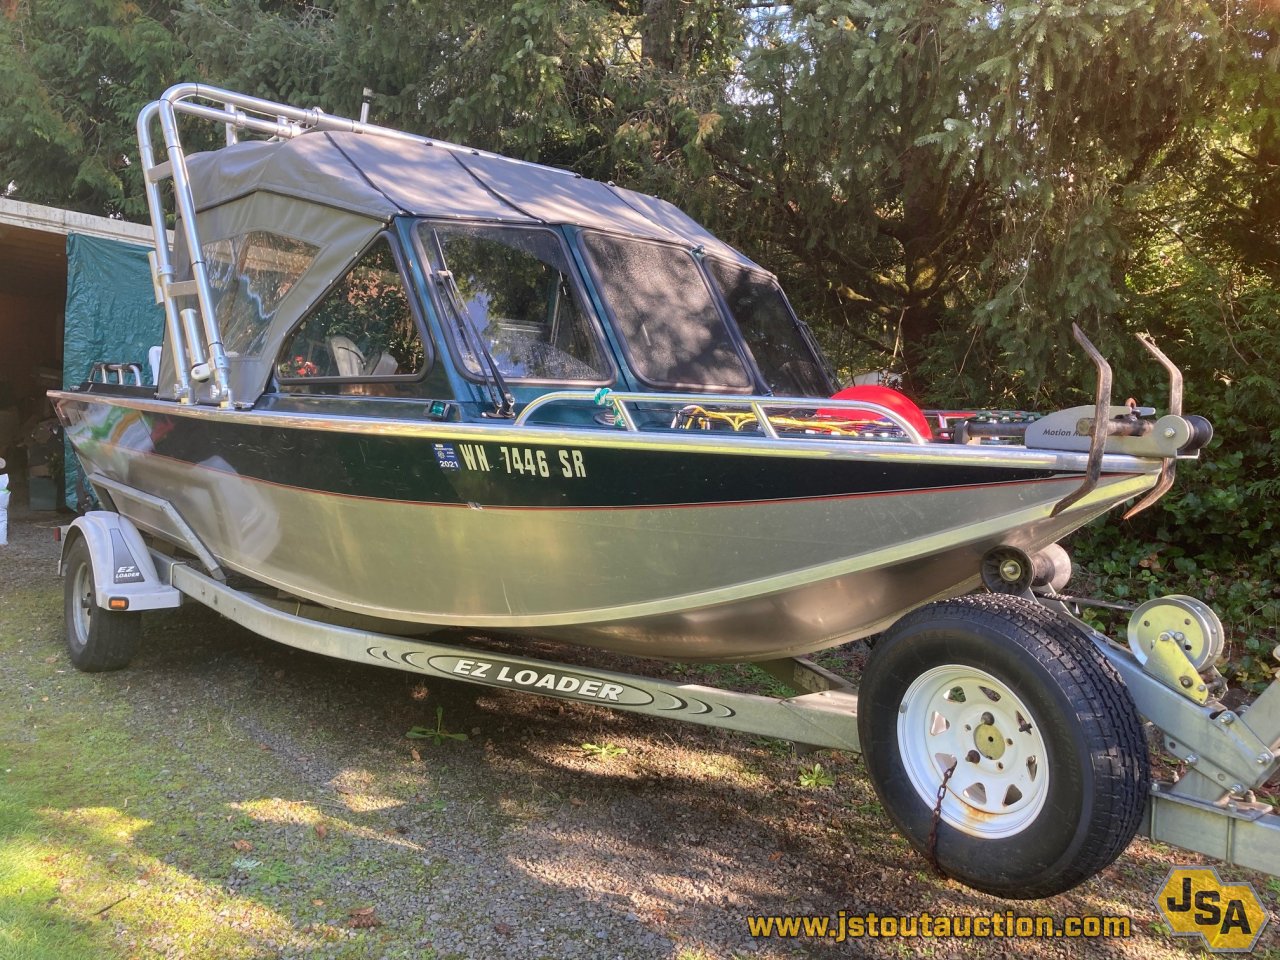 For Sale: 1999 North River Sportster19 Boats Fishing Boats